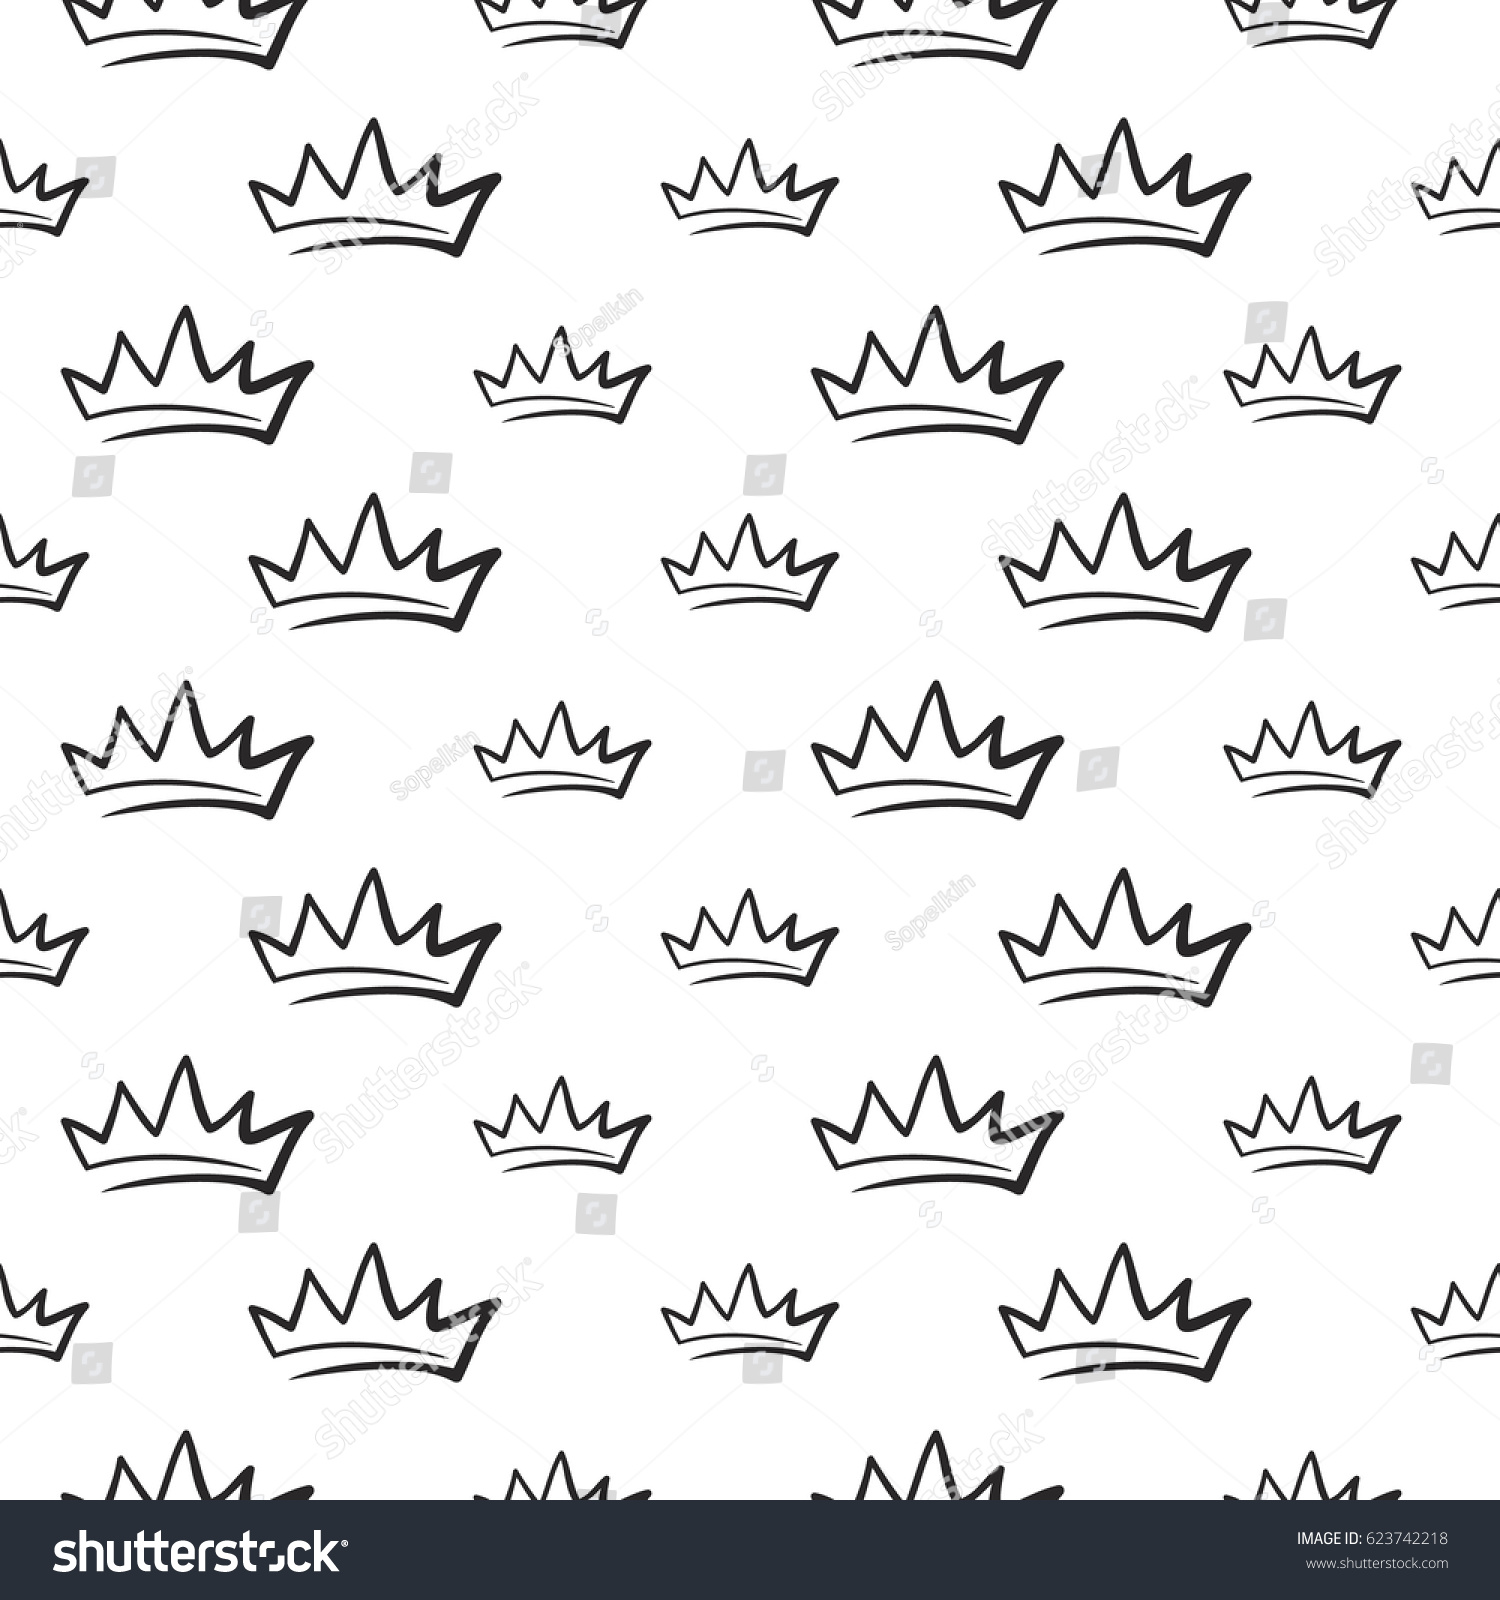 Download Attractive King Crown Vector Seamless Pattern Stock Vector ...